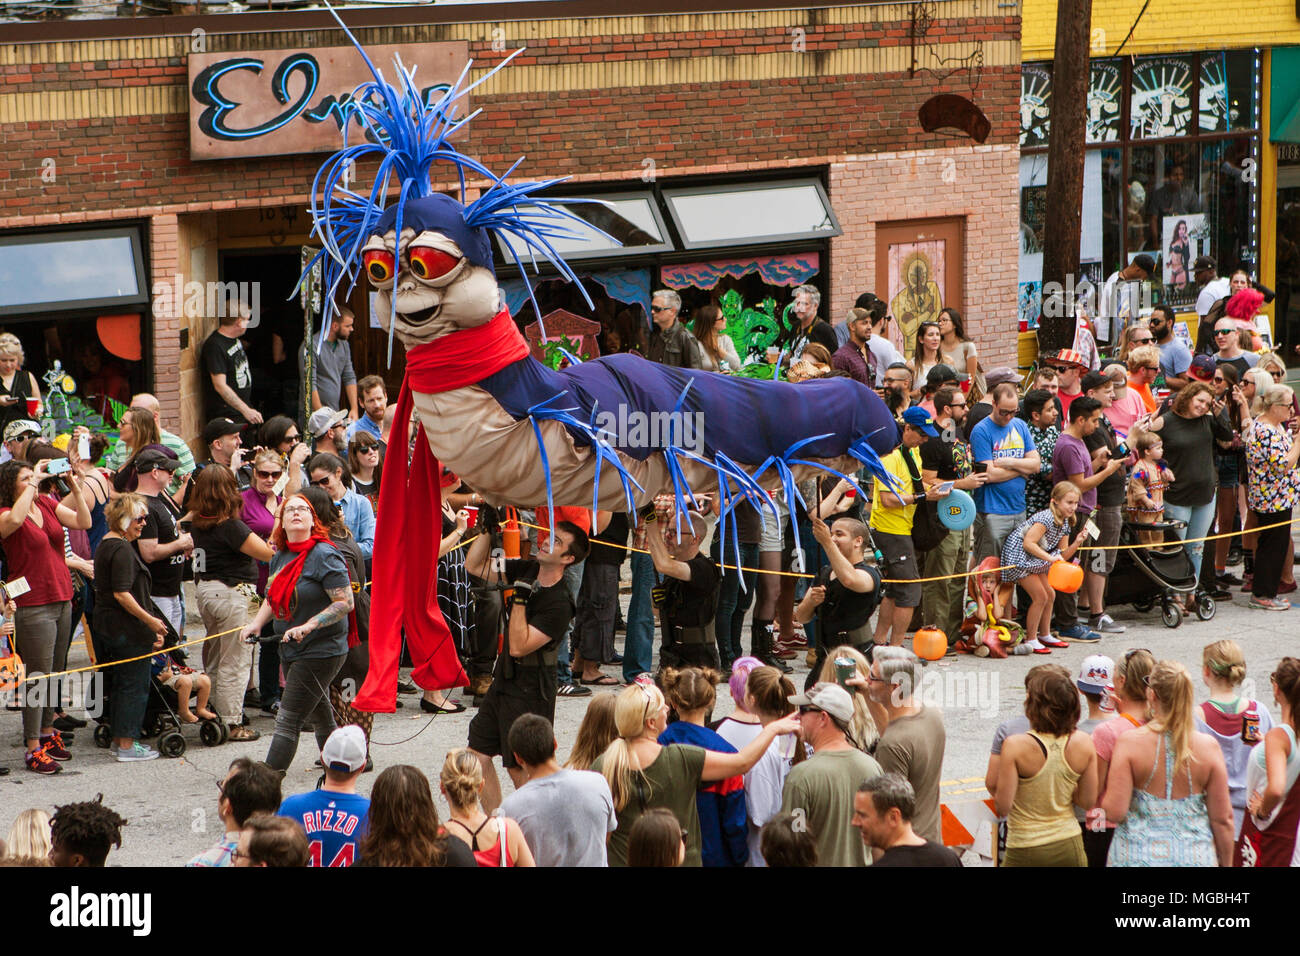 little 5 points halloween festival and parade 2020 the vortex october 20 Little Five Points Atlanta High Resolution Stock Photography And Images Alamy little 5 points halloween festival and parade 2020 the vortex october 20